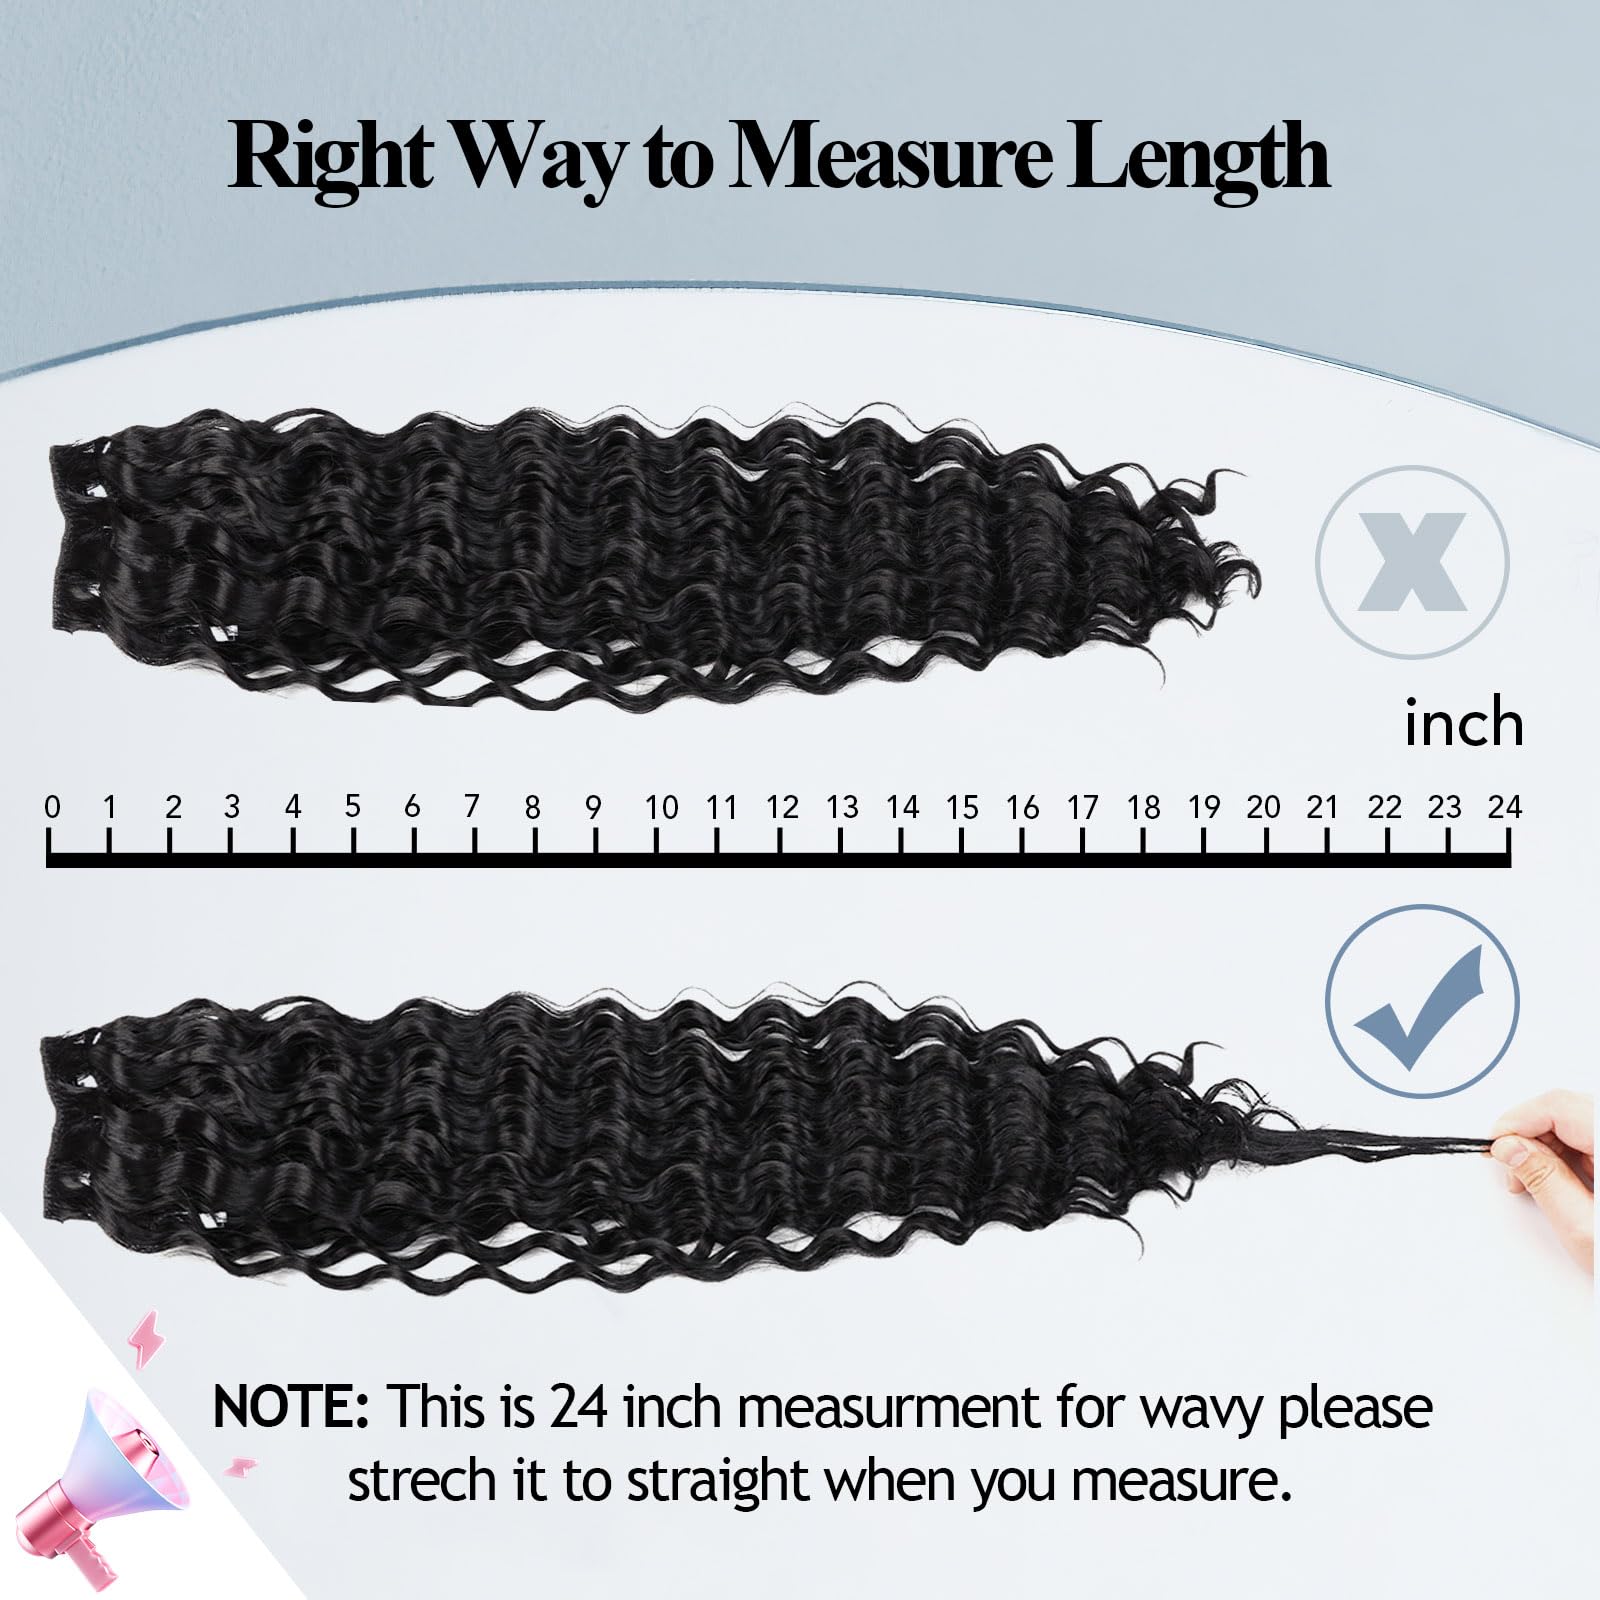 MEEPO Dark Brown Curly Clip In Hair Extension For Black Women Natural Thick Deep Wave Hair Extension Clips Synthetic Long 24 inch real human hair extensions clip in Hairpiece (2#(Pack of 7))